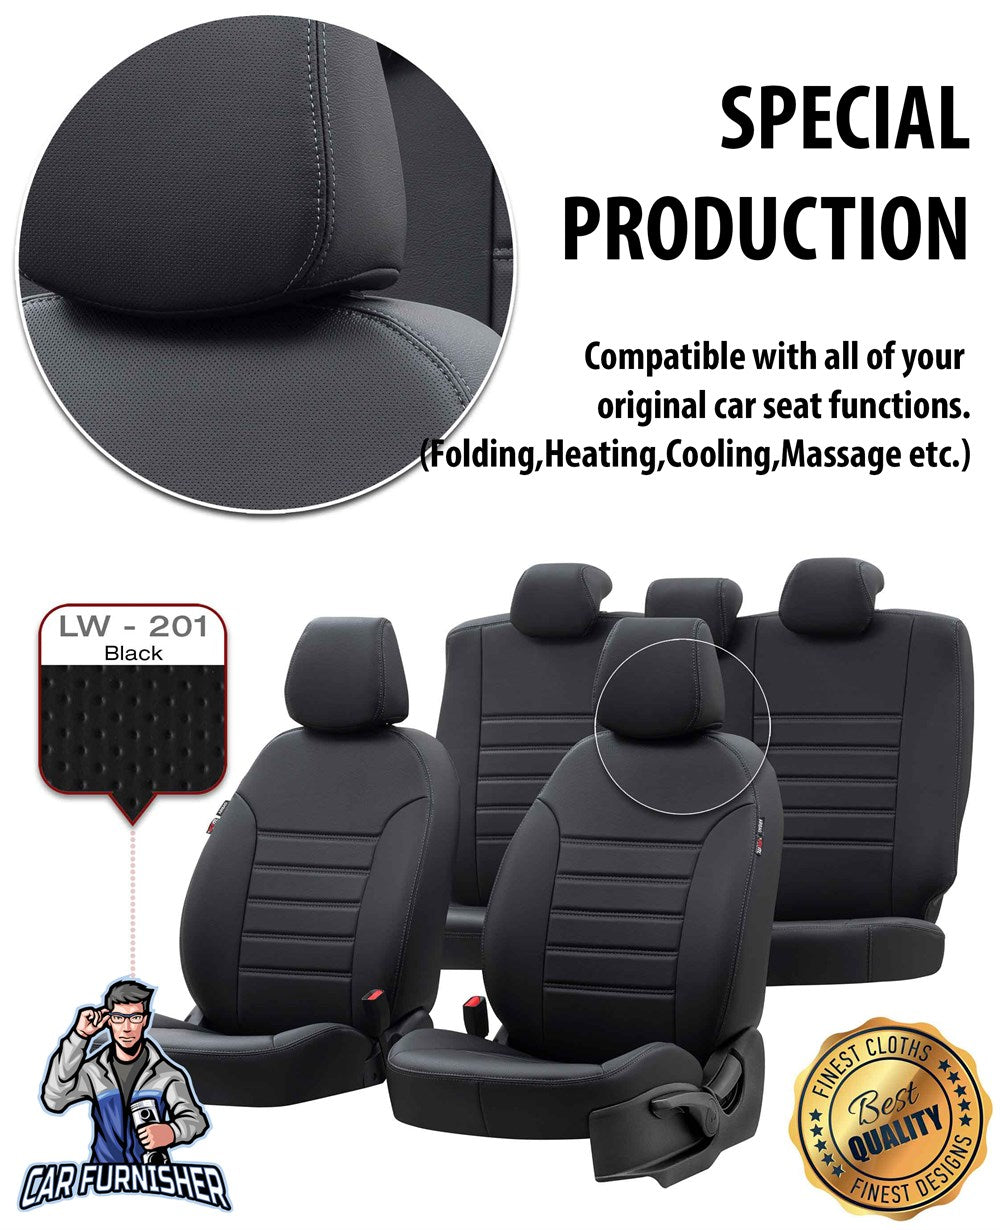 Fiat Ducato Seat Covers Istanbul Leather Design Smoked Black Leather